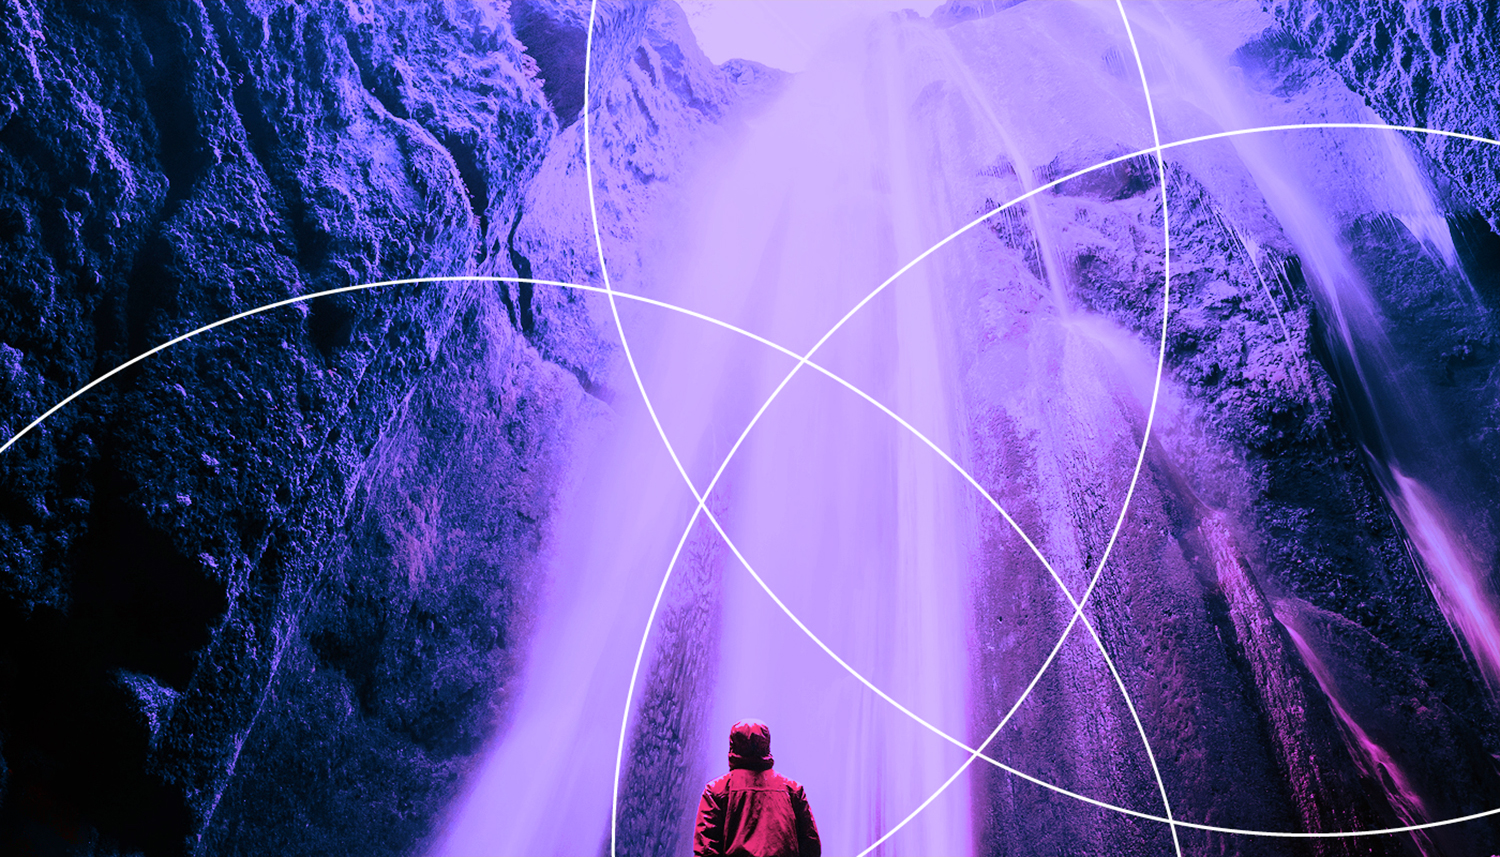 A person in a red jacket facing a massive, purple-tinted waterfall with geometric white lines overlaying the image.